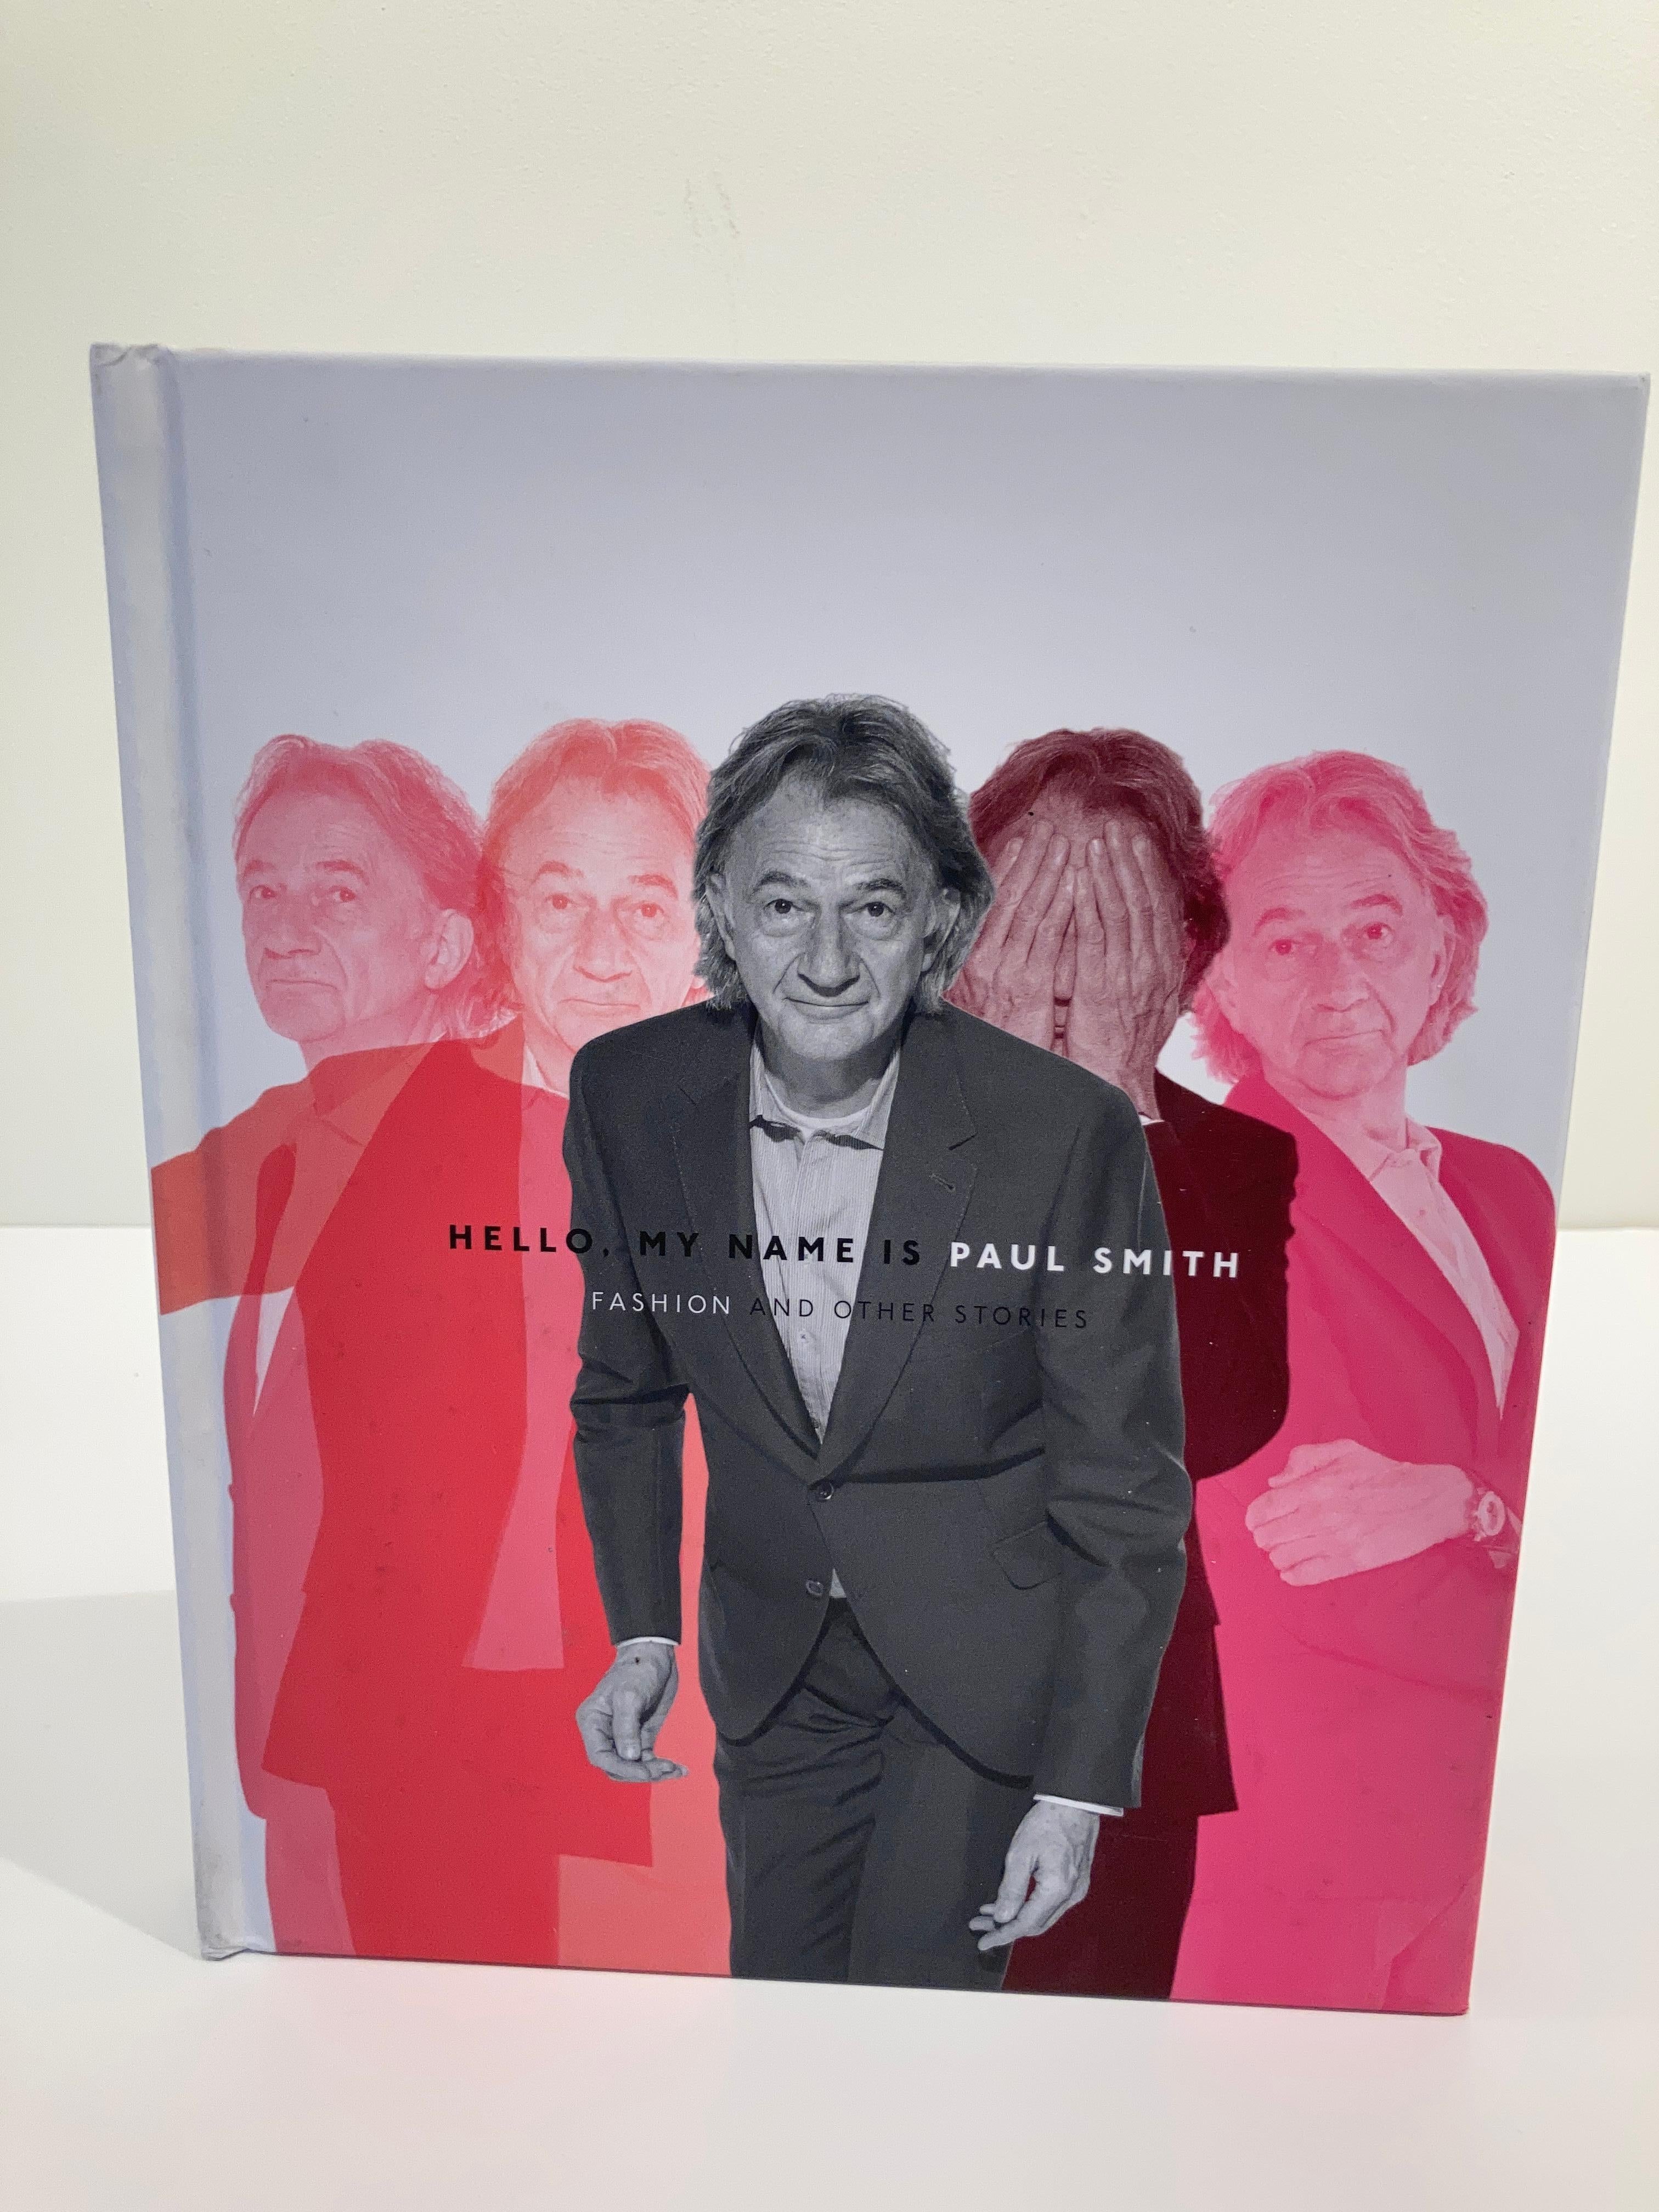 Hello, My Name Is Paul Smith: Fashion and Other Stories Book In Good Condition For Sale In North Hollywood, CA